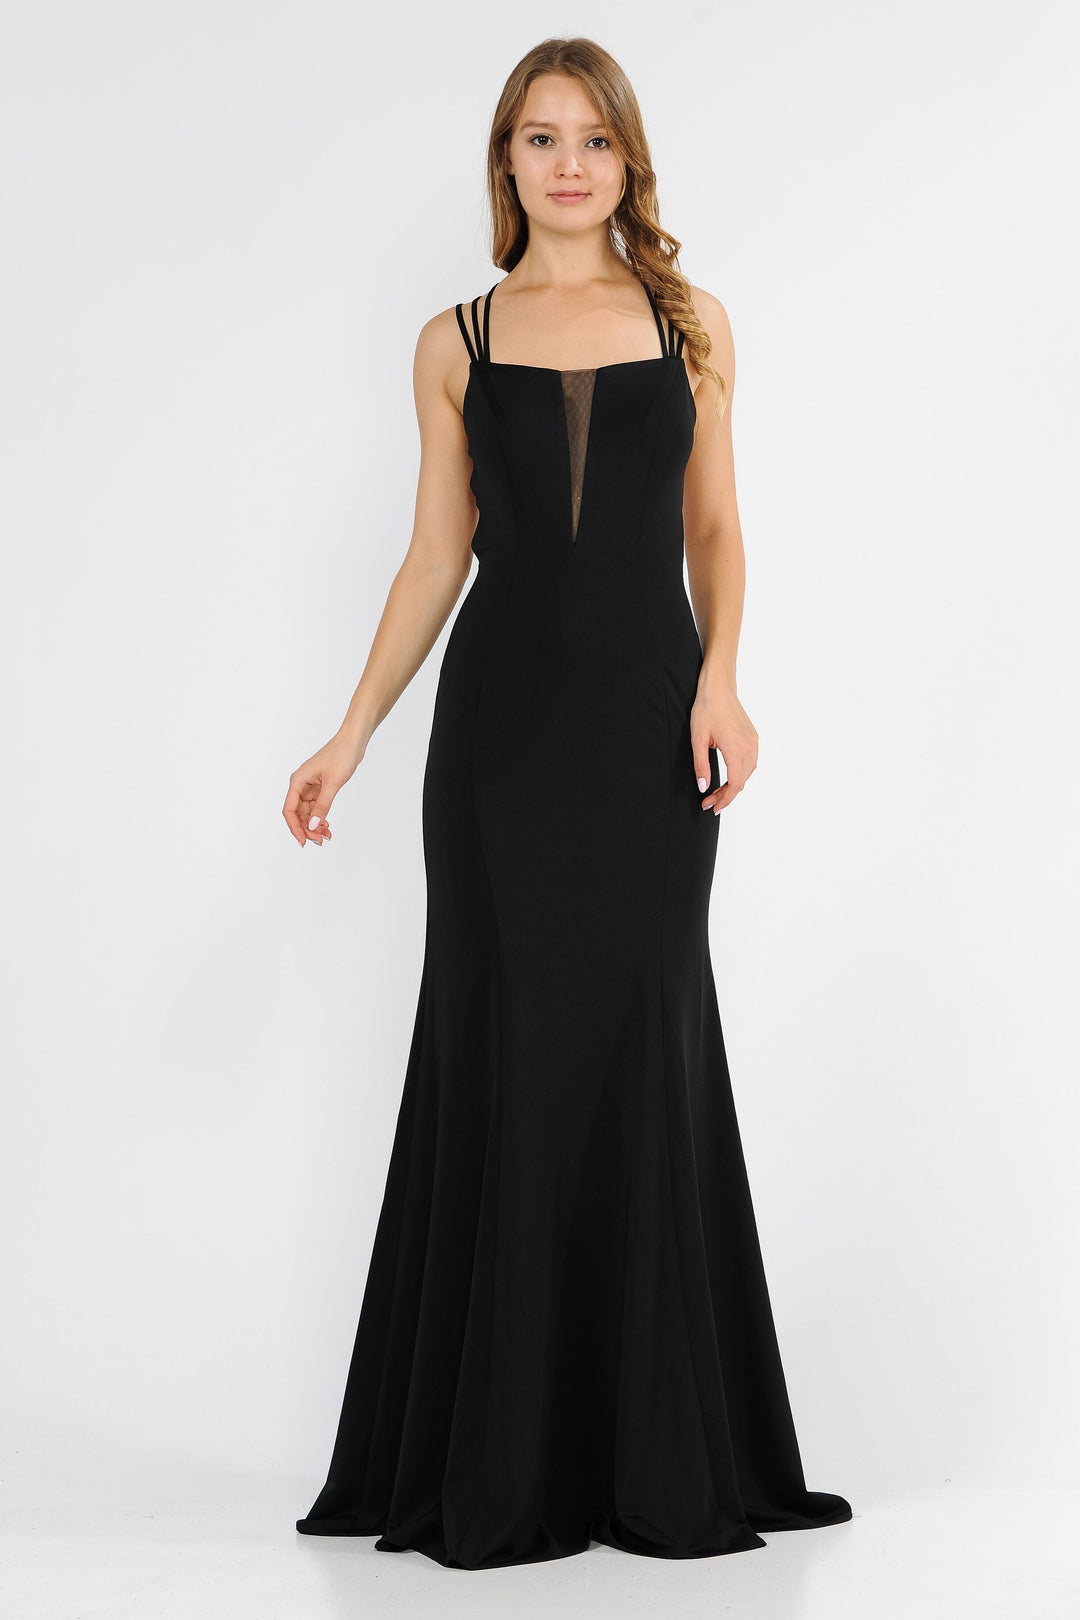 Long Strappy Open Back Dress with Illusion Panel by Poly USA 8468